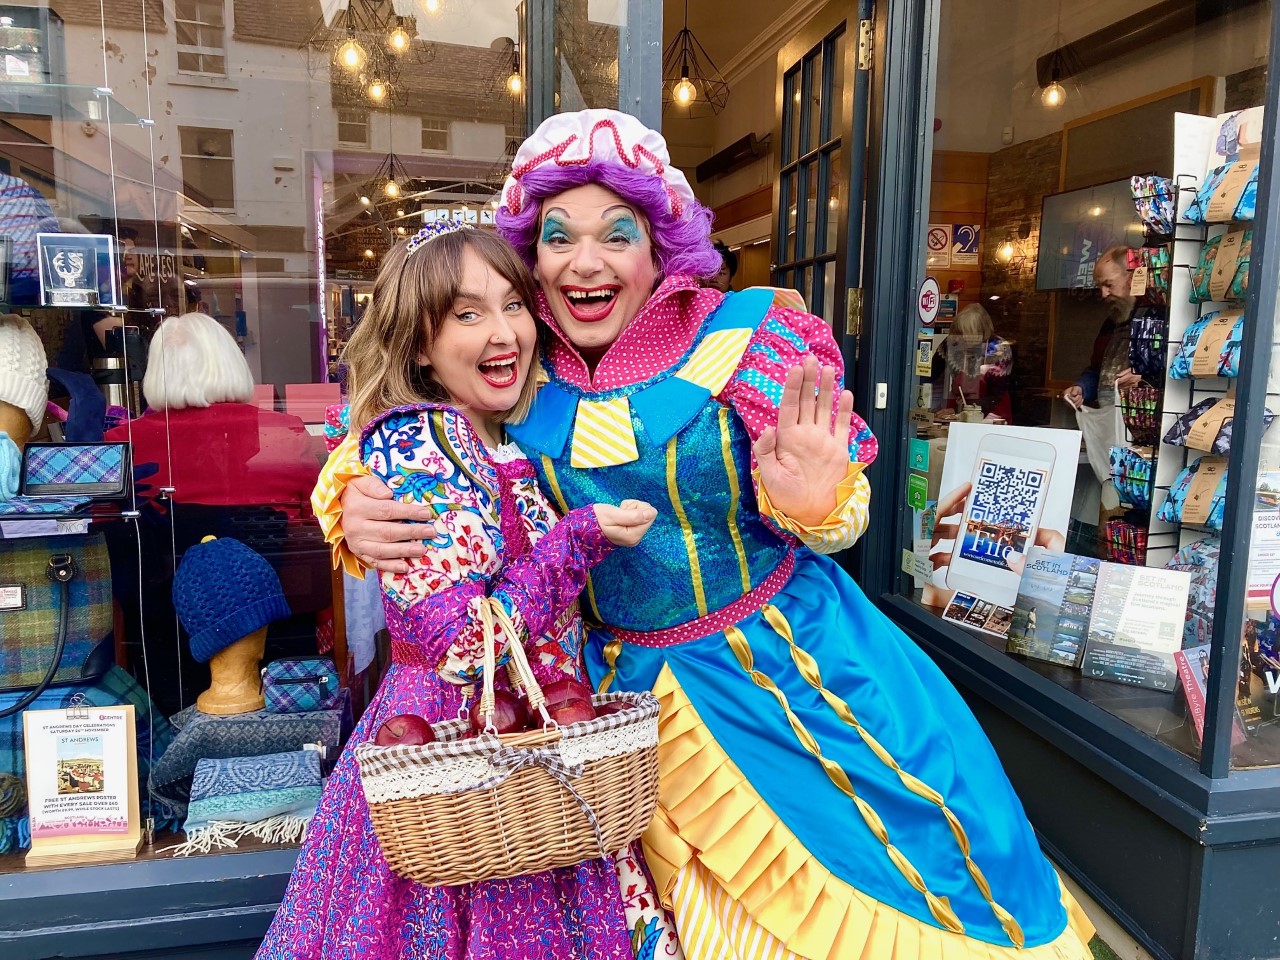 Local panto stars Snow White and Nanny Ticklepenny gate-crashed the St Andrew's Day Tasting Event at St Andrews iCentre